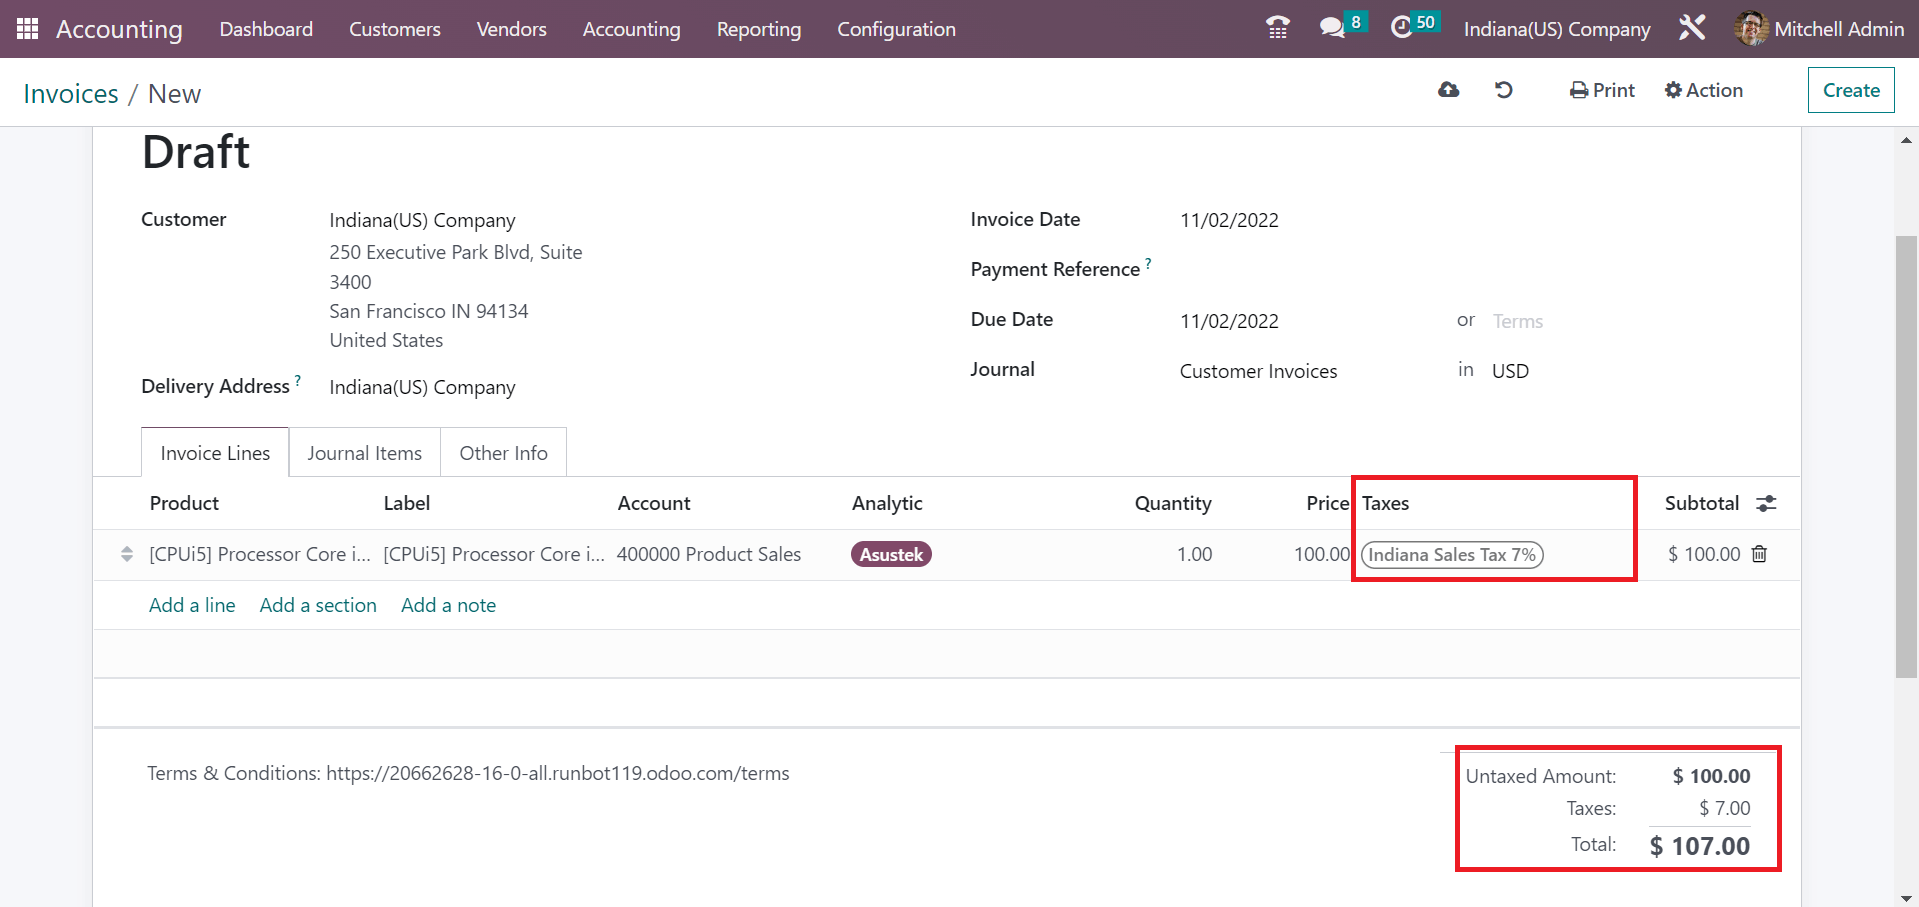  how-to-calculate-indiana-us-sales-tax-in-odoo-16-accounting-cybrosys